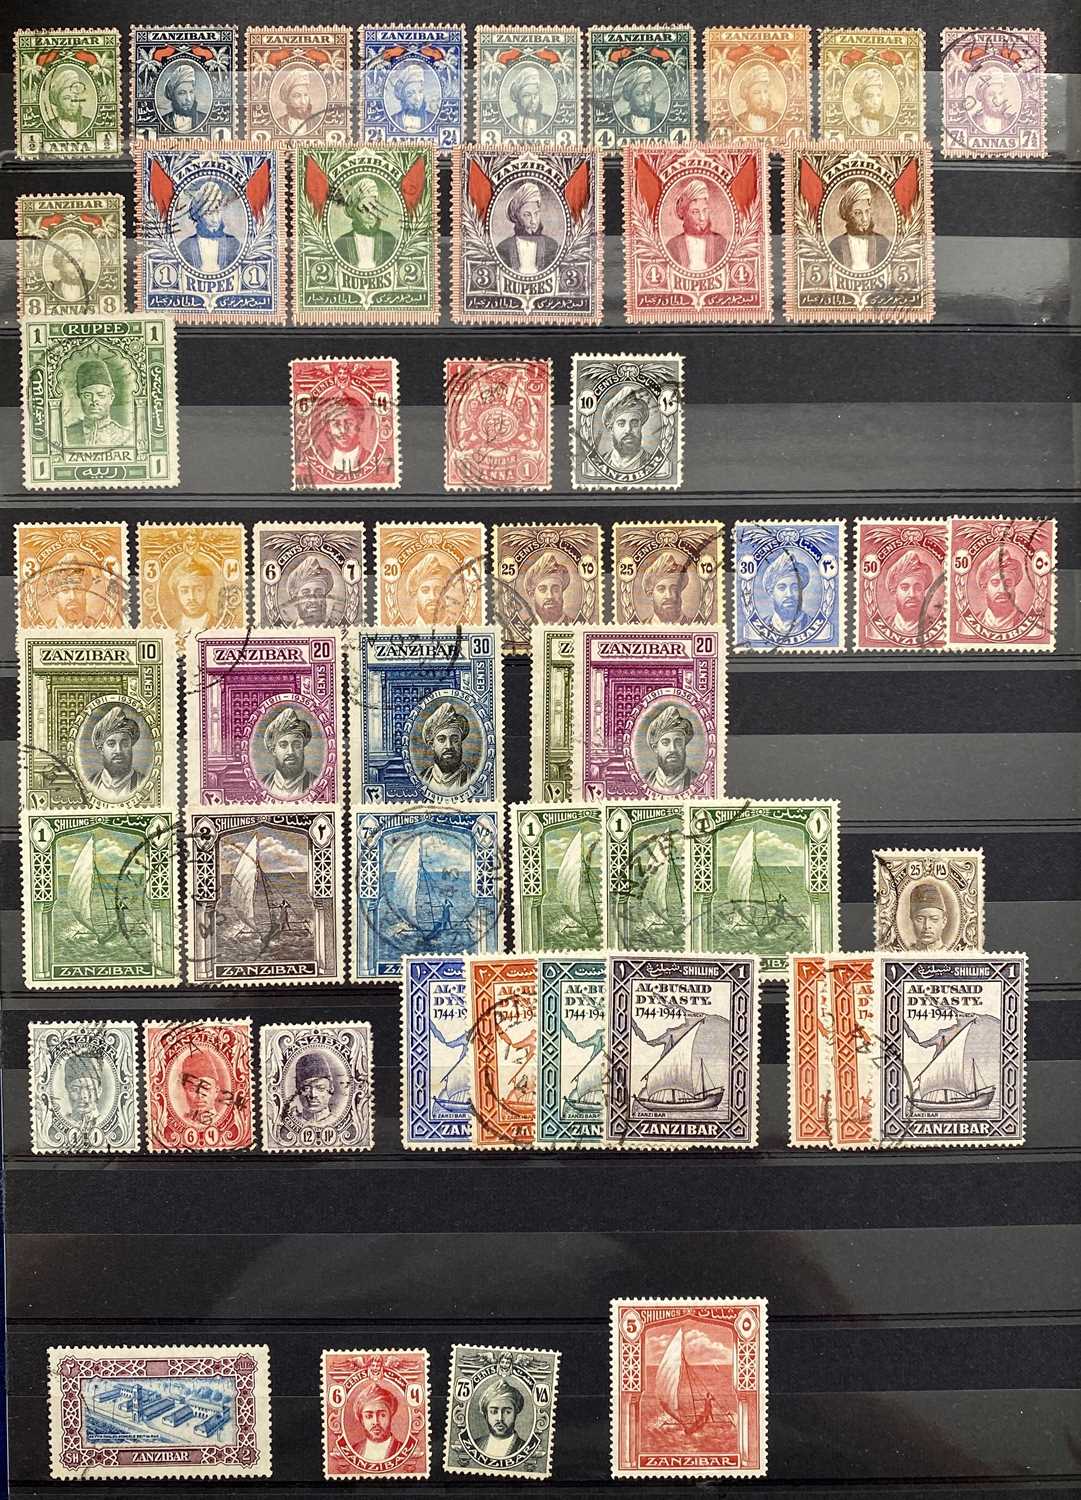 COMMONWEALTH GV1 - fine used collection of many countries, full sets and top values, good quality